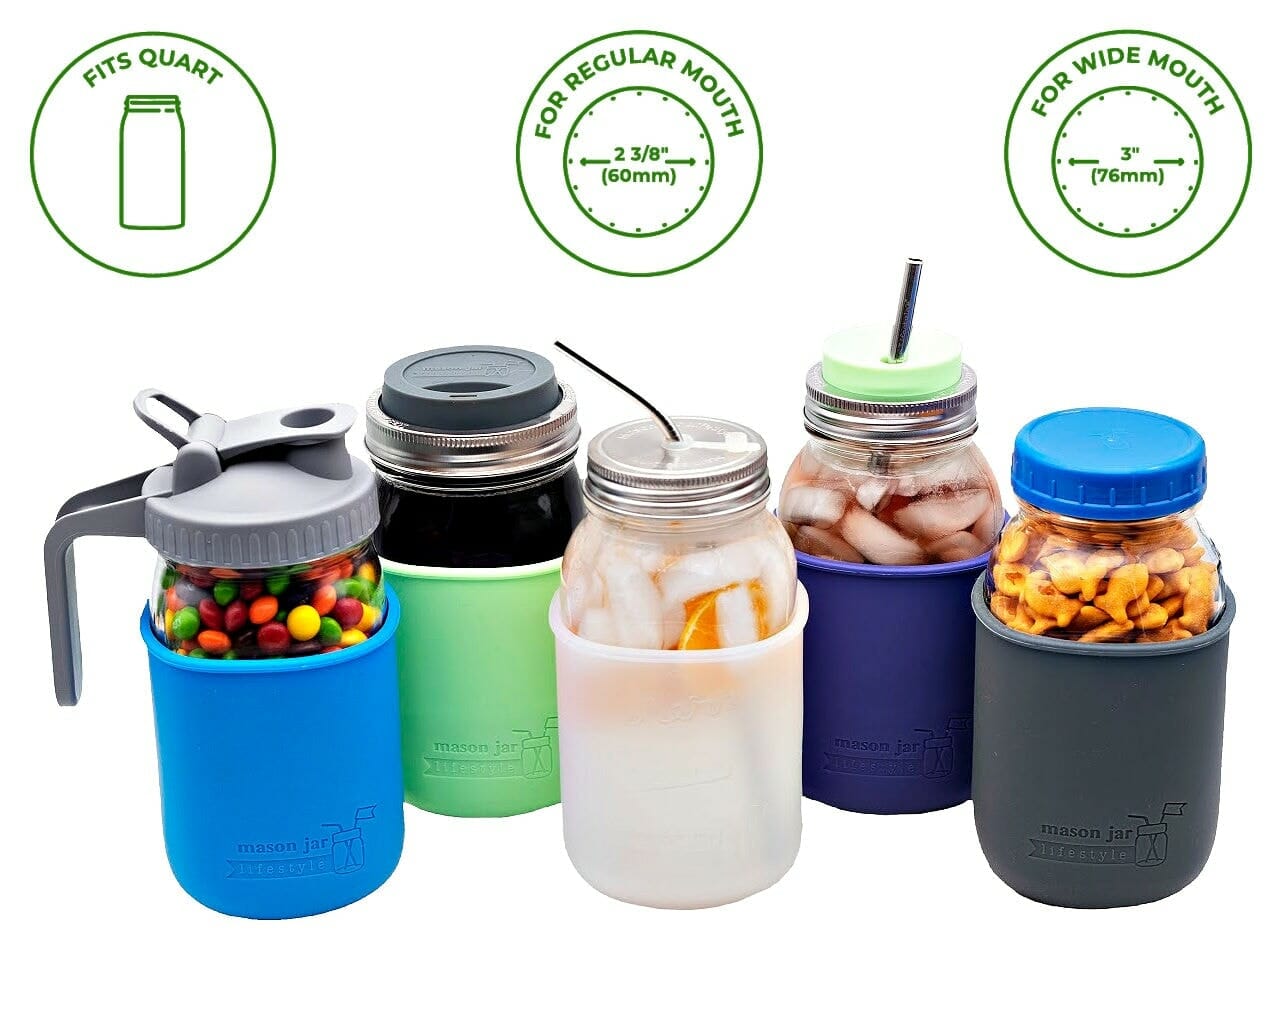 Quart 32 oz Ball and Kerr regular and wide mouth Mason jars with silicone sleeve / jacket in blue, mint green, frost clear, purple, and gray.